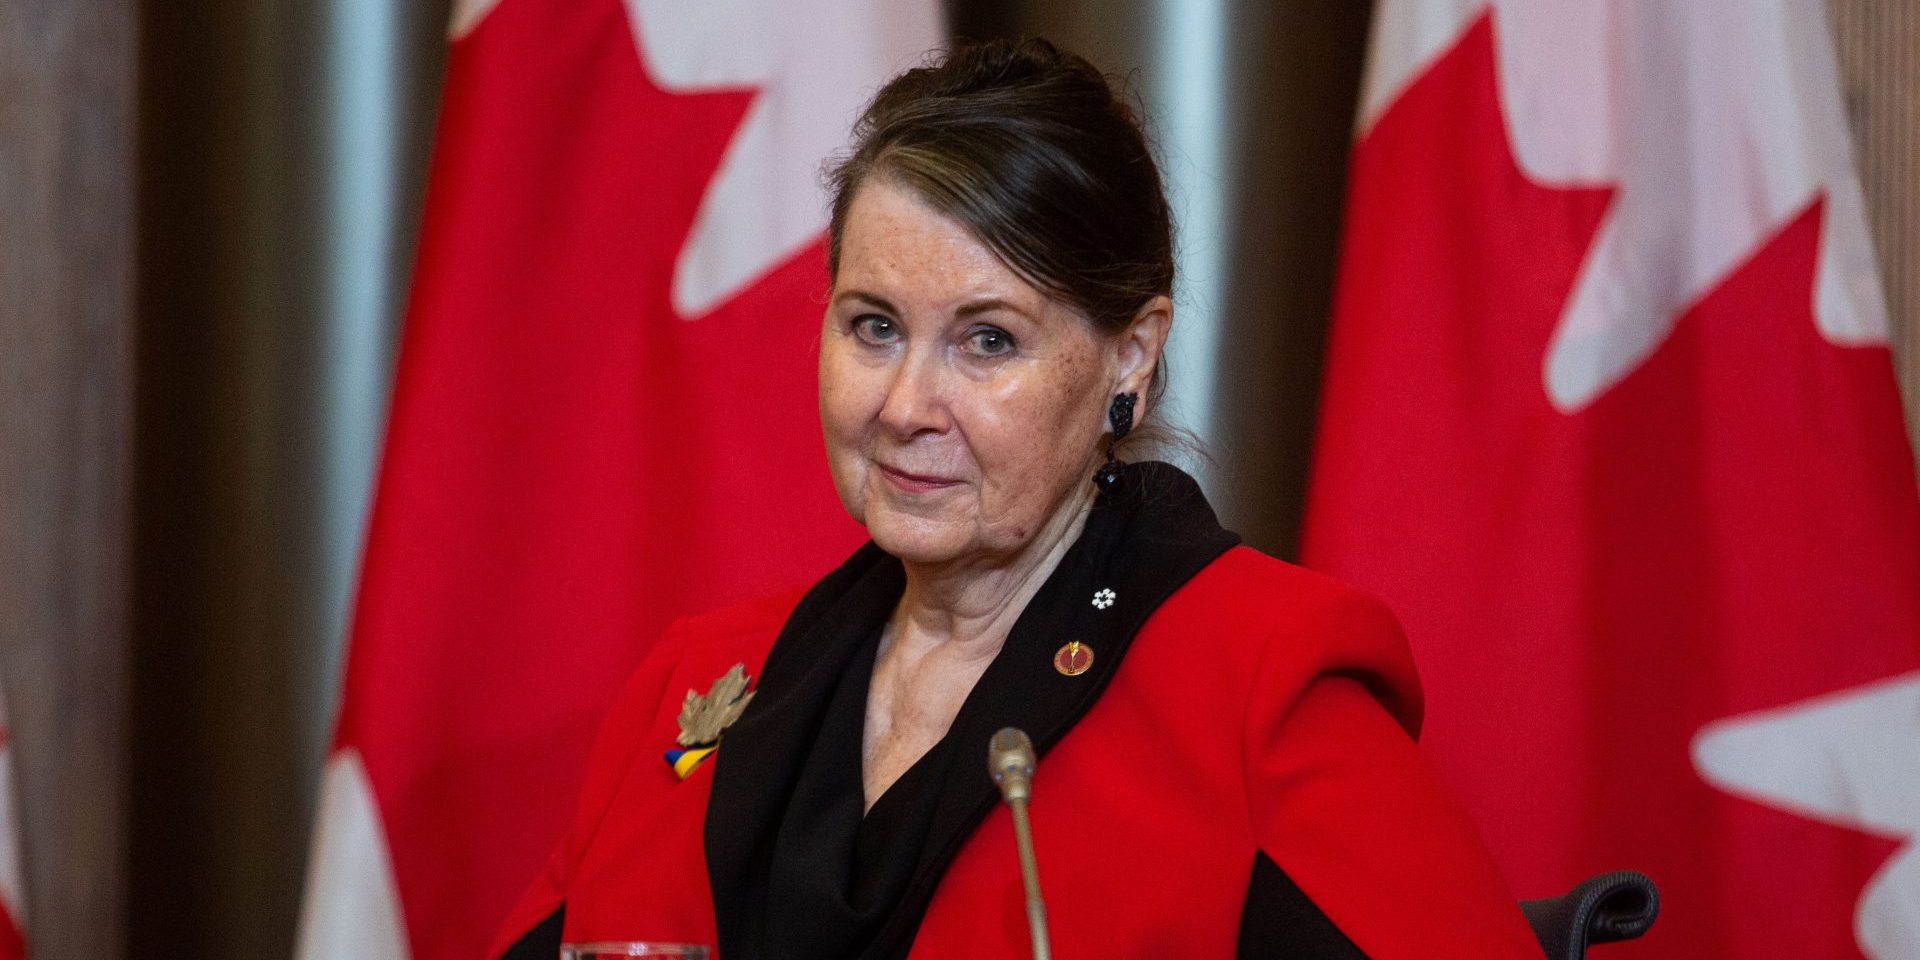 Senator Marilou McPhedran speaks during a press conference on June 2, 2022, to speak publicly for the first time about certain grave concerns on the current status of Canada’s processing of applications from Afghans. The Hill Times photograph by Andrew Meade